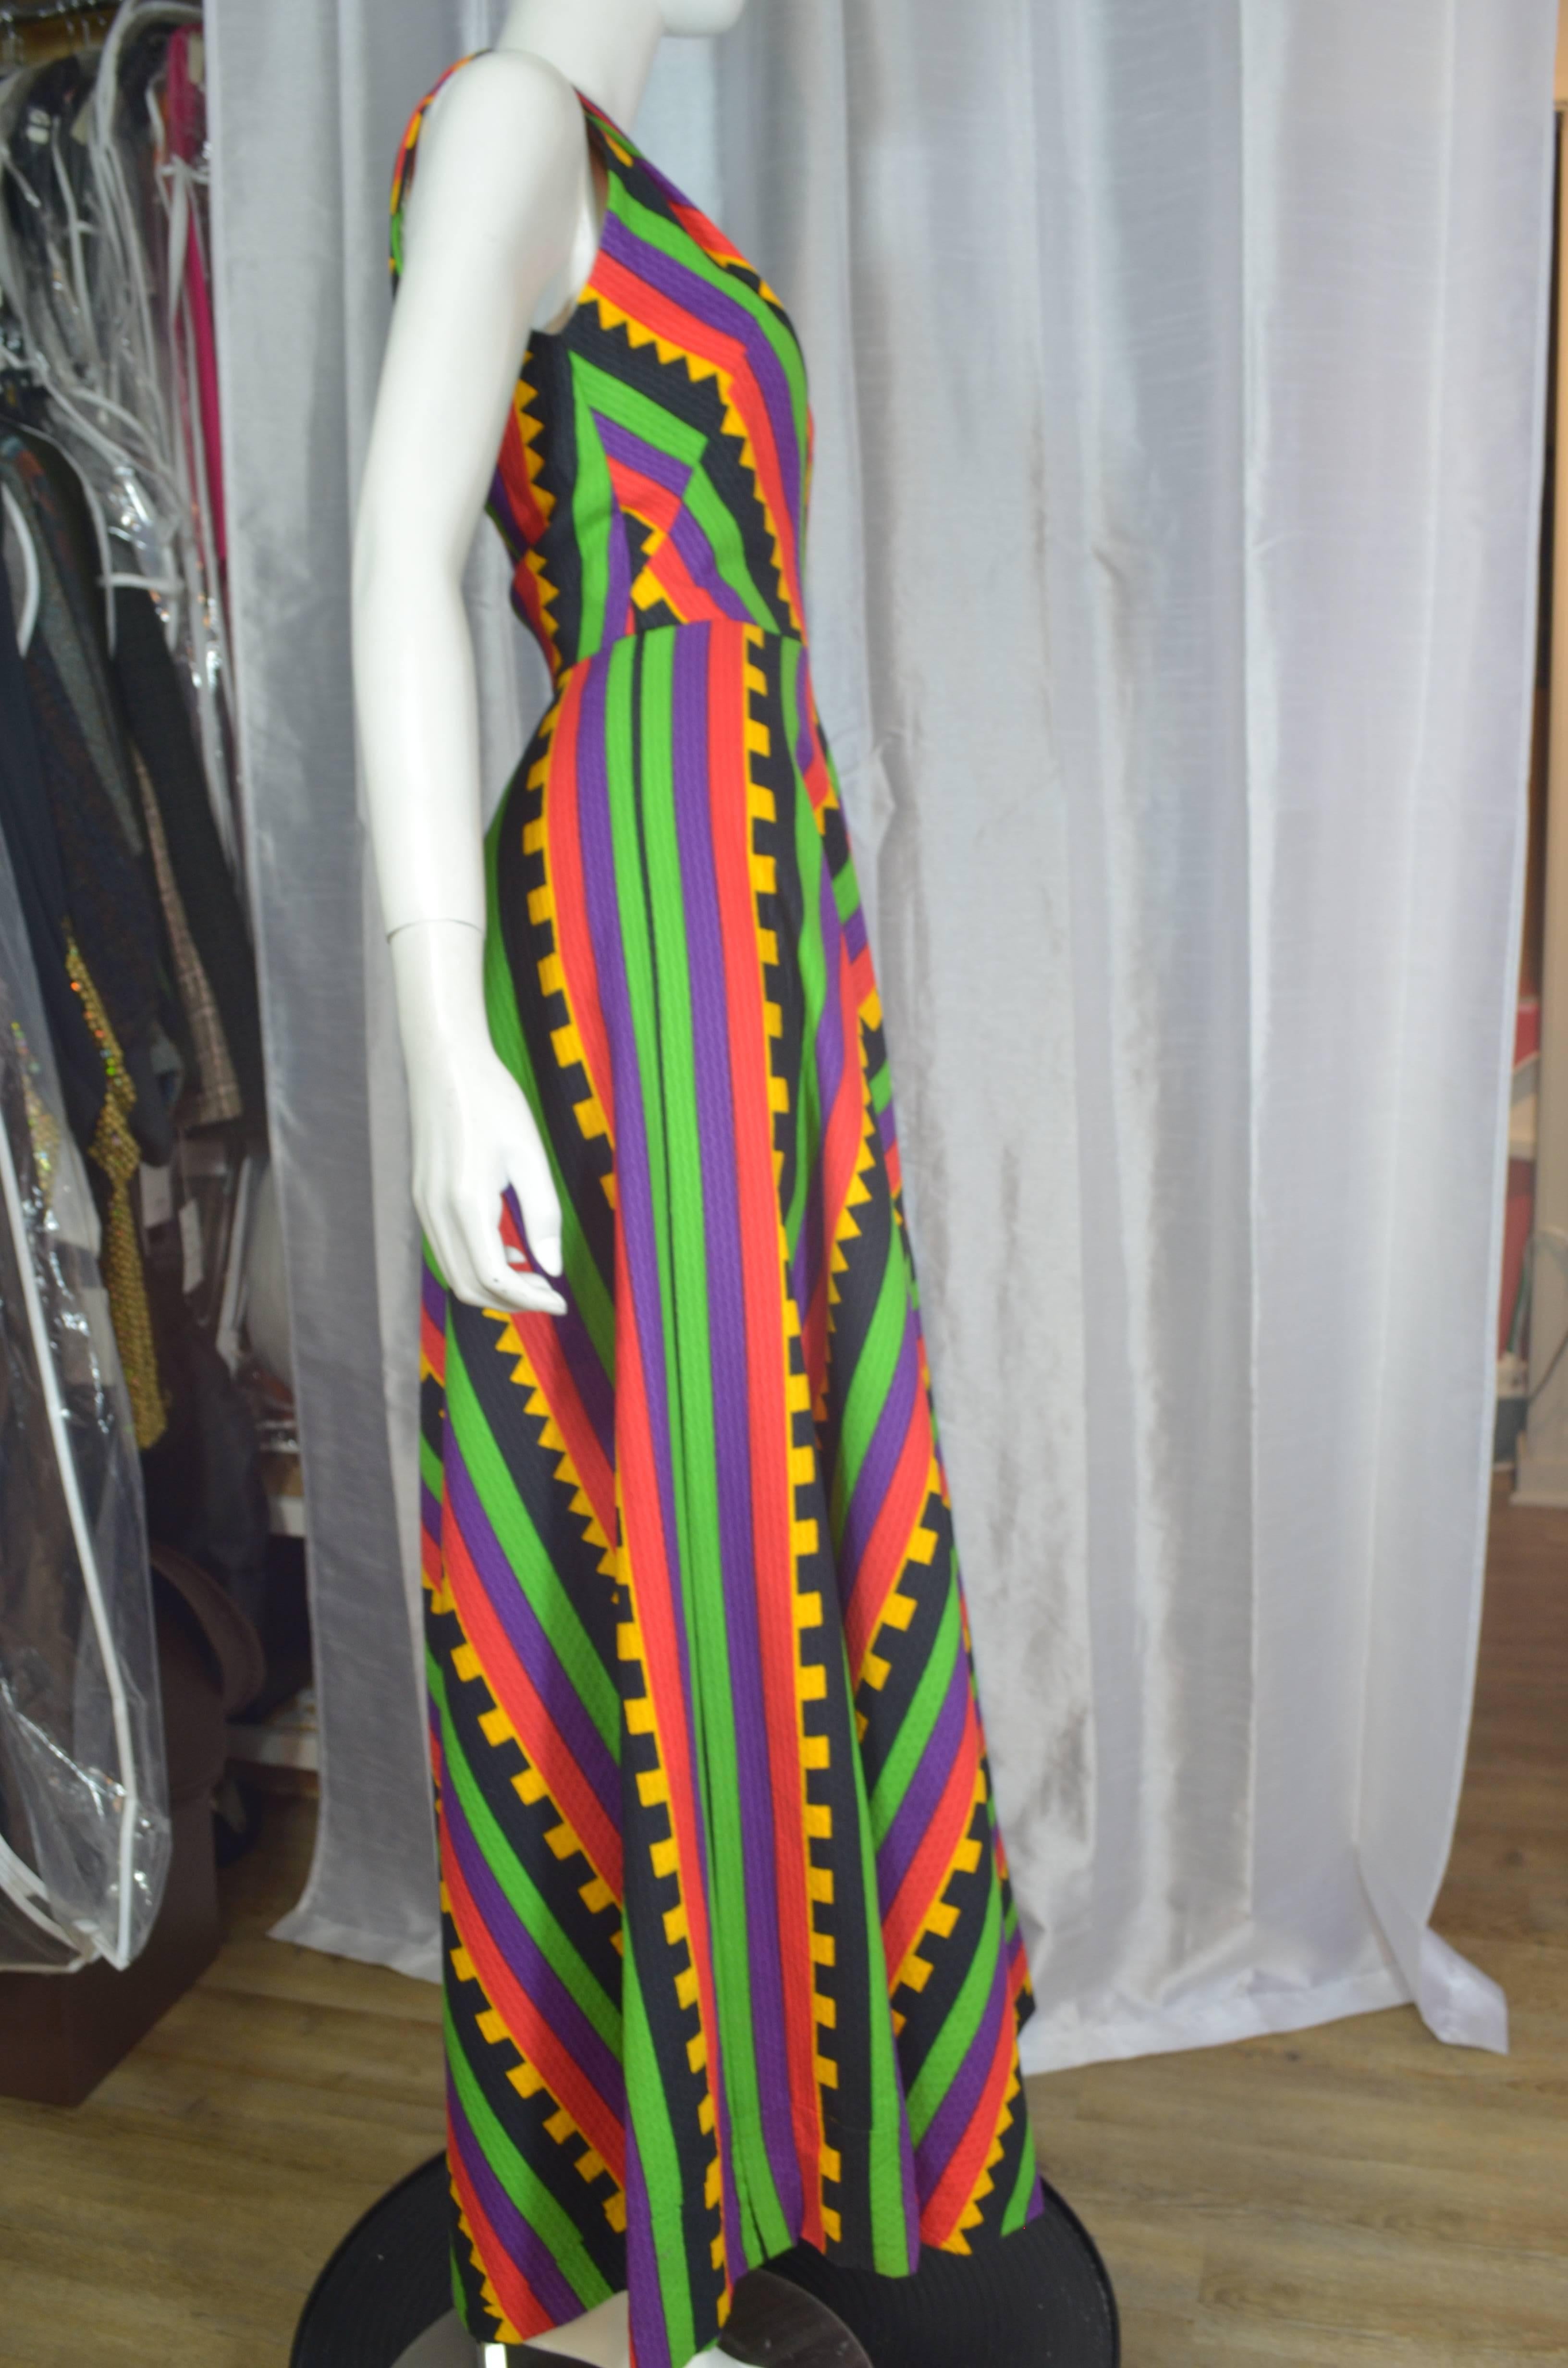 Vintage Lanvin Couture colorful textured cotton pique one-shoulder dress as seen on Kim Cattrall in the 2008 Sex and the City movie. Set tag included. Metal ring zipper and metal ring garnish at the shoulder. Circa 1970s. Please see images for